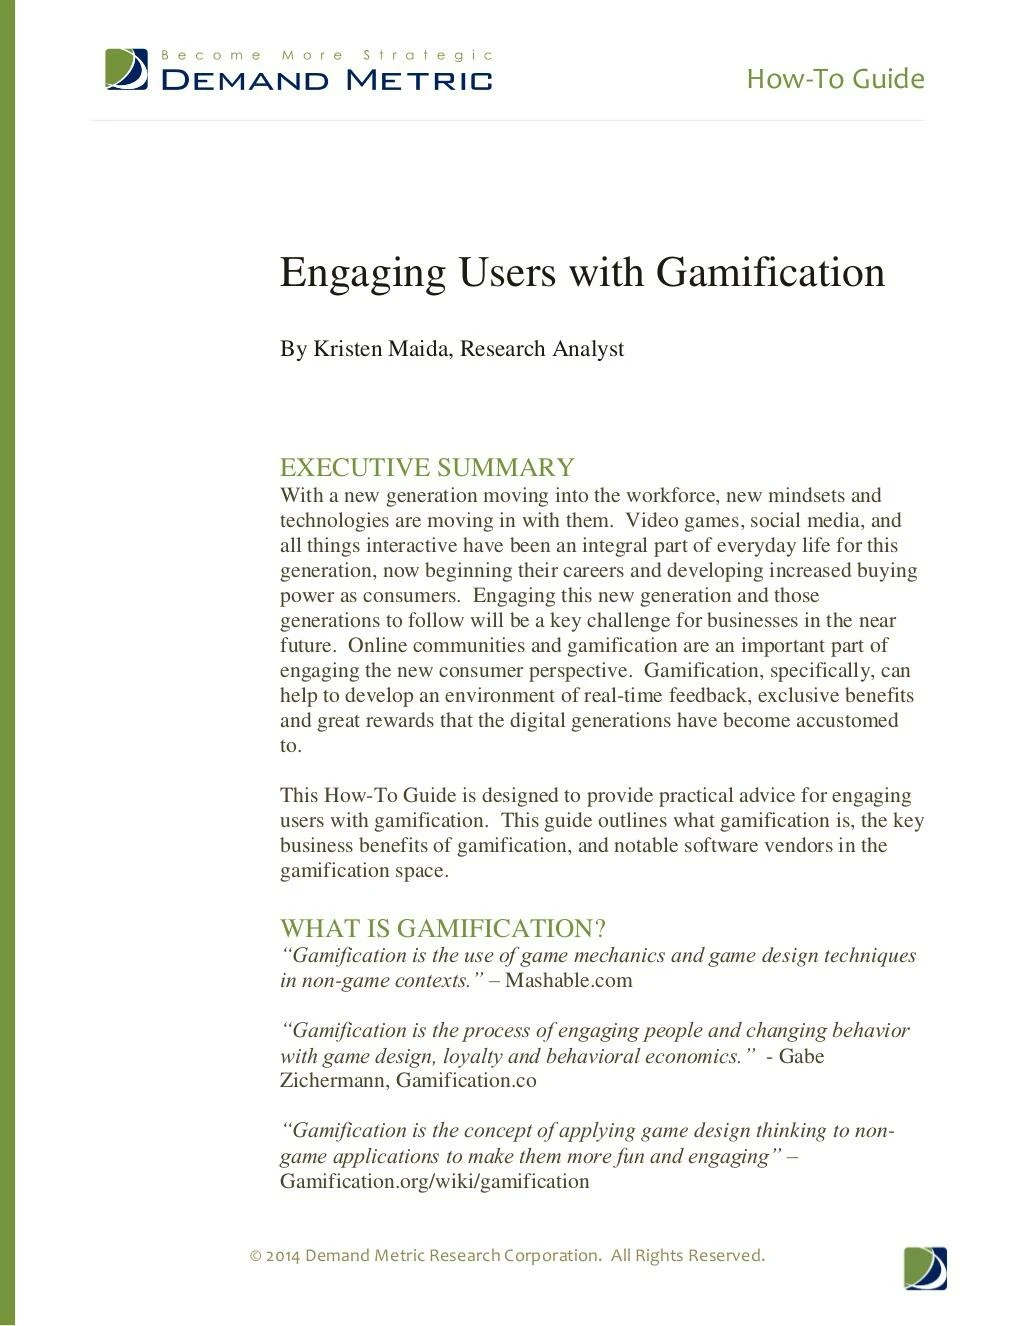 how to guide engaging users with gamification